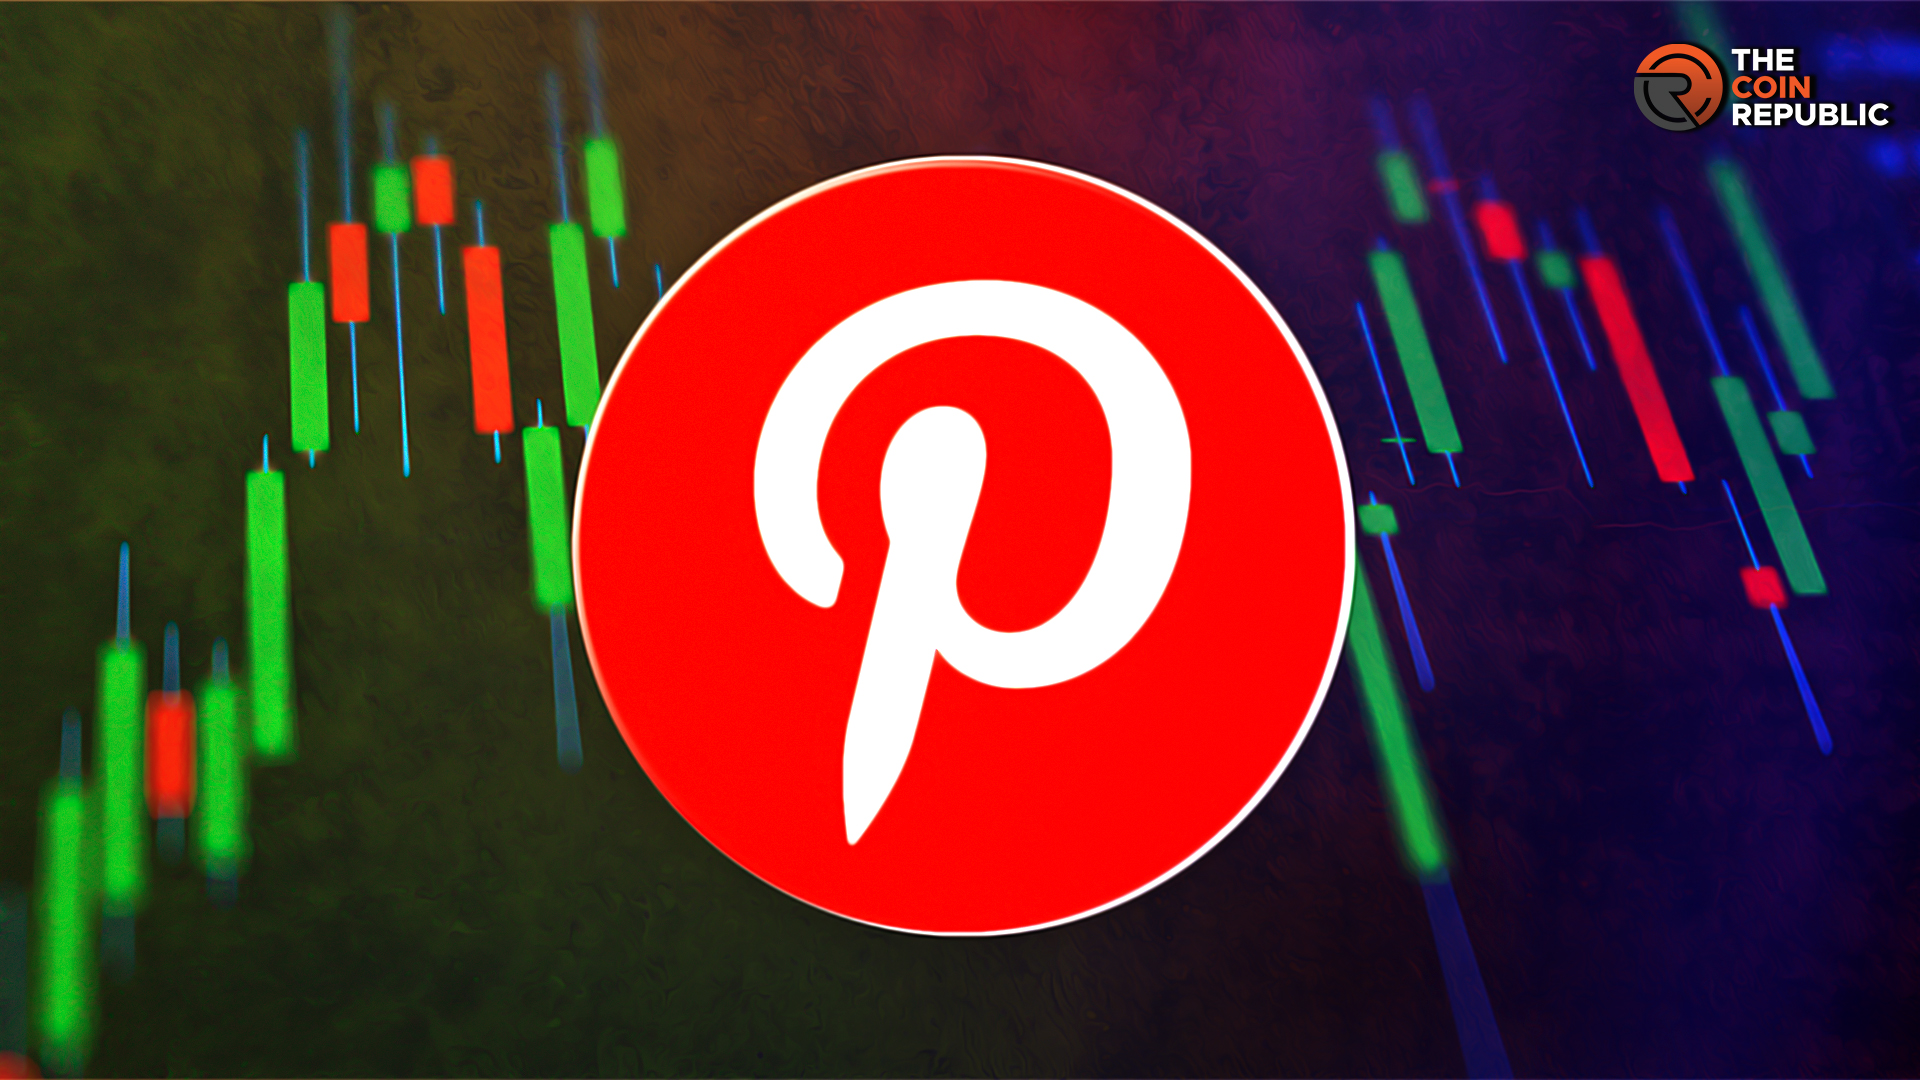 Pinterest Inc (NYSE: PINS): Is PINS Stock Ready For Breakout?